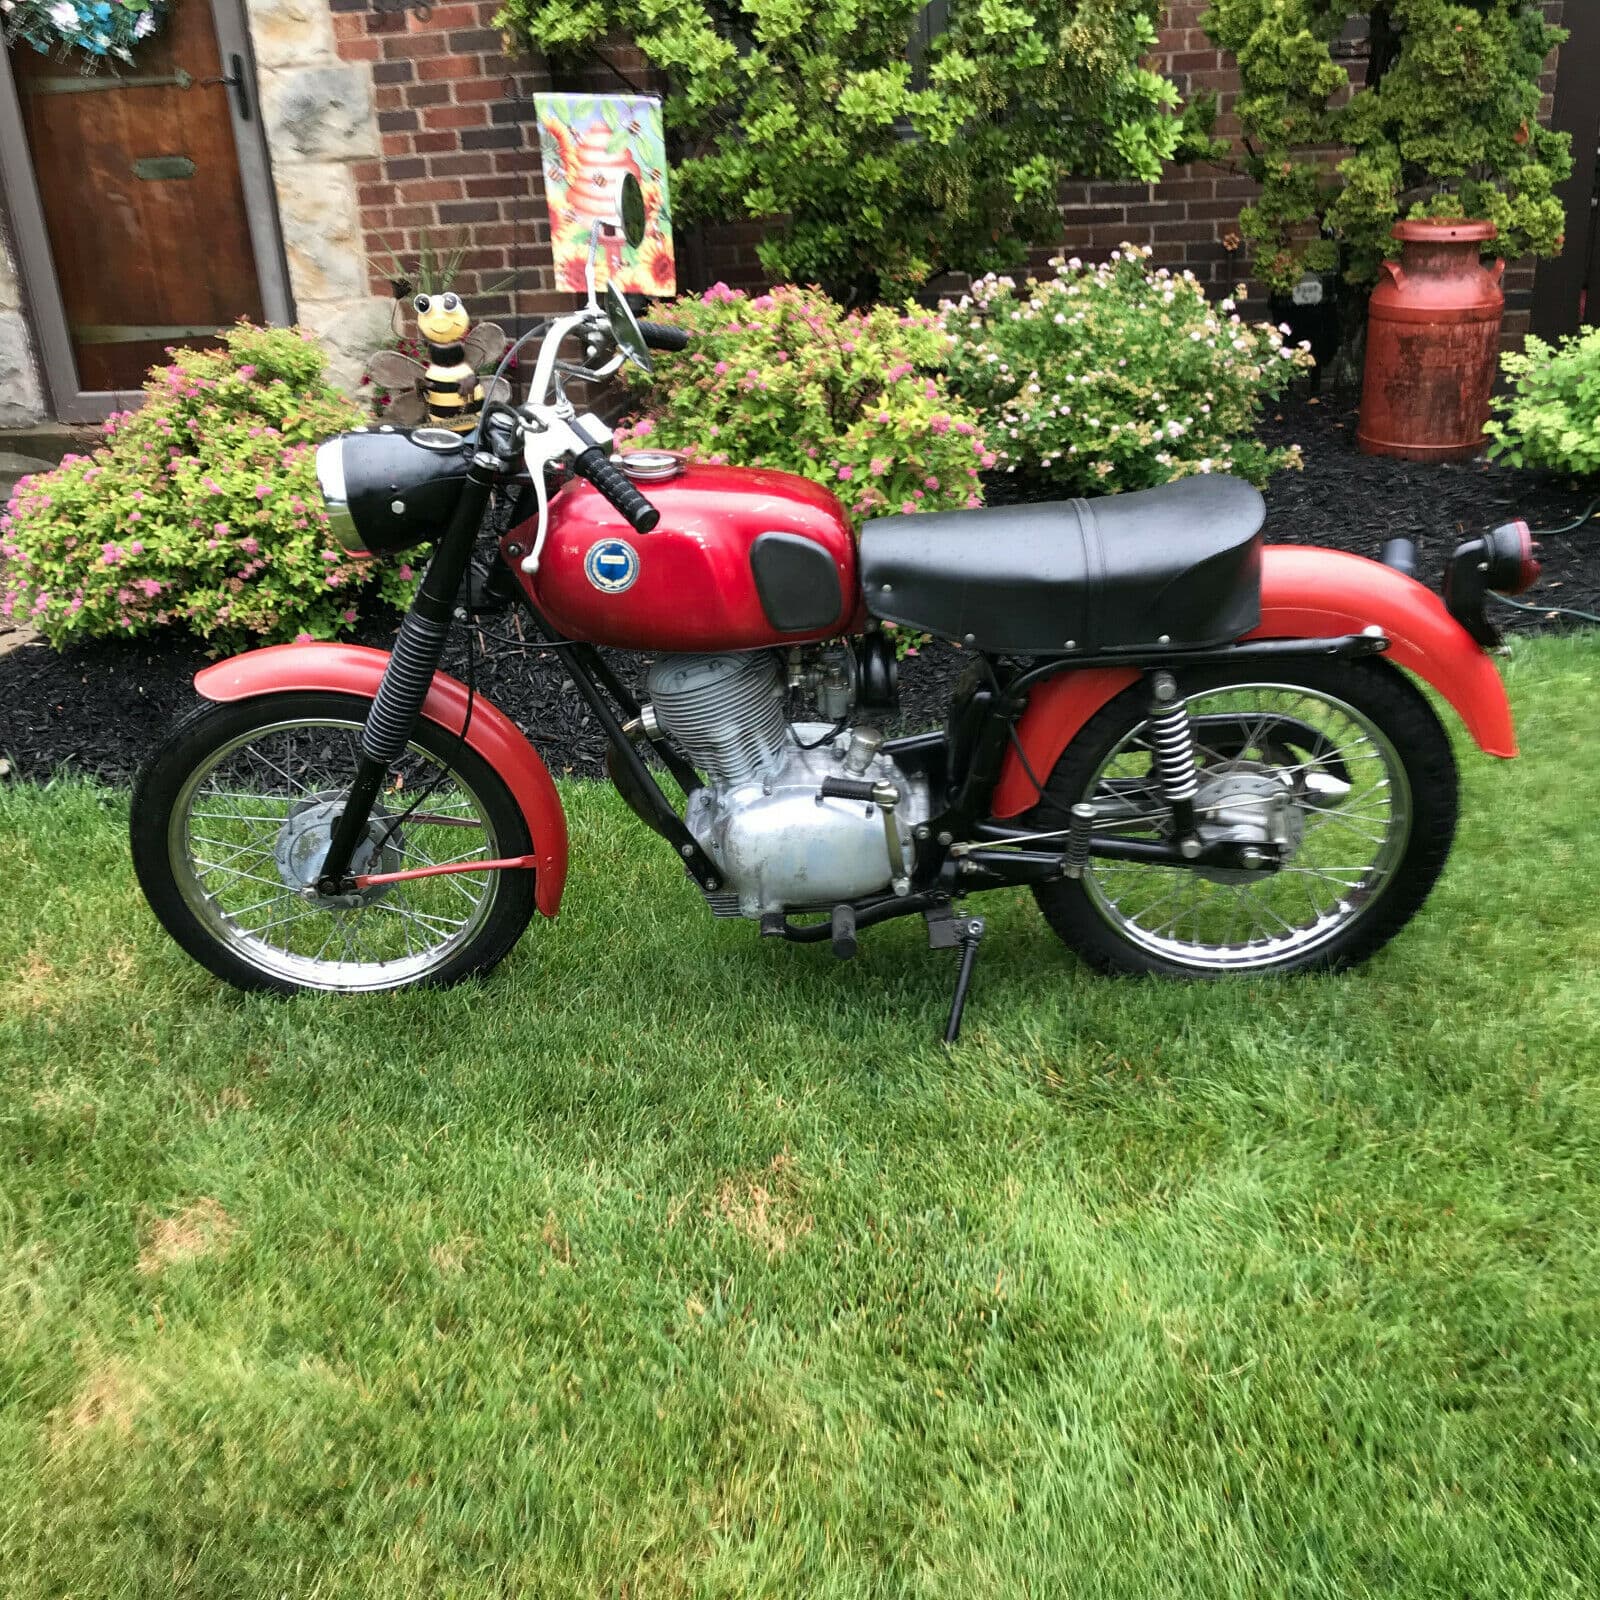 808.89541 Sears 106SS  Motorcycle